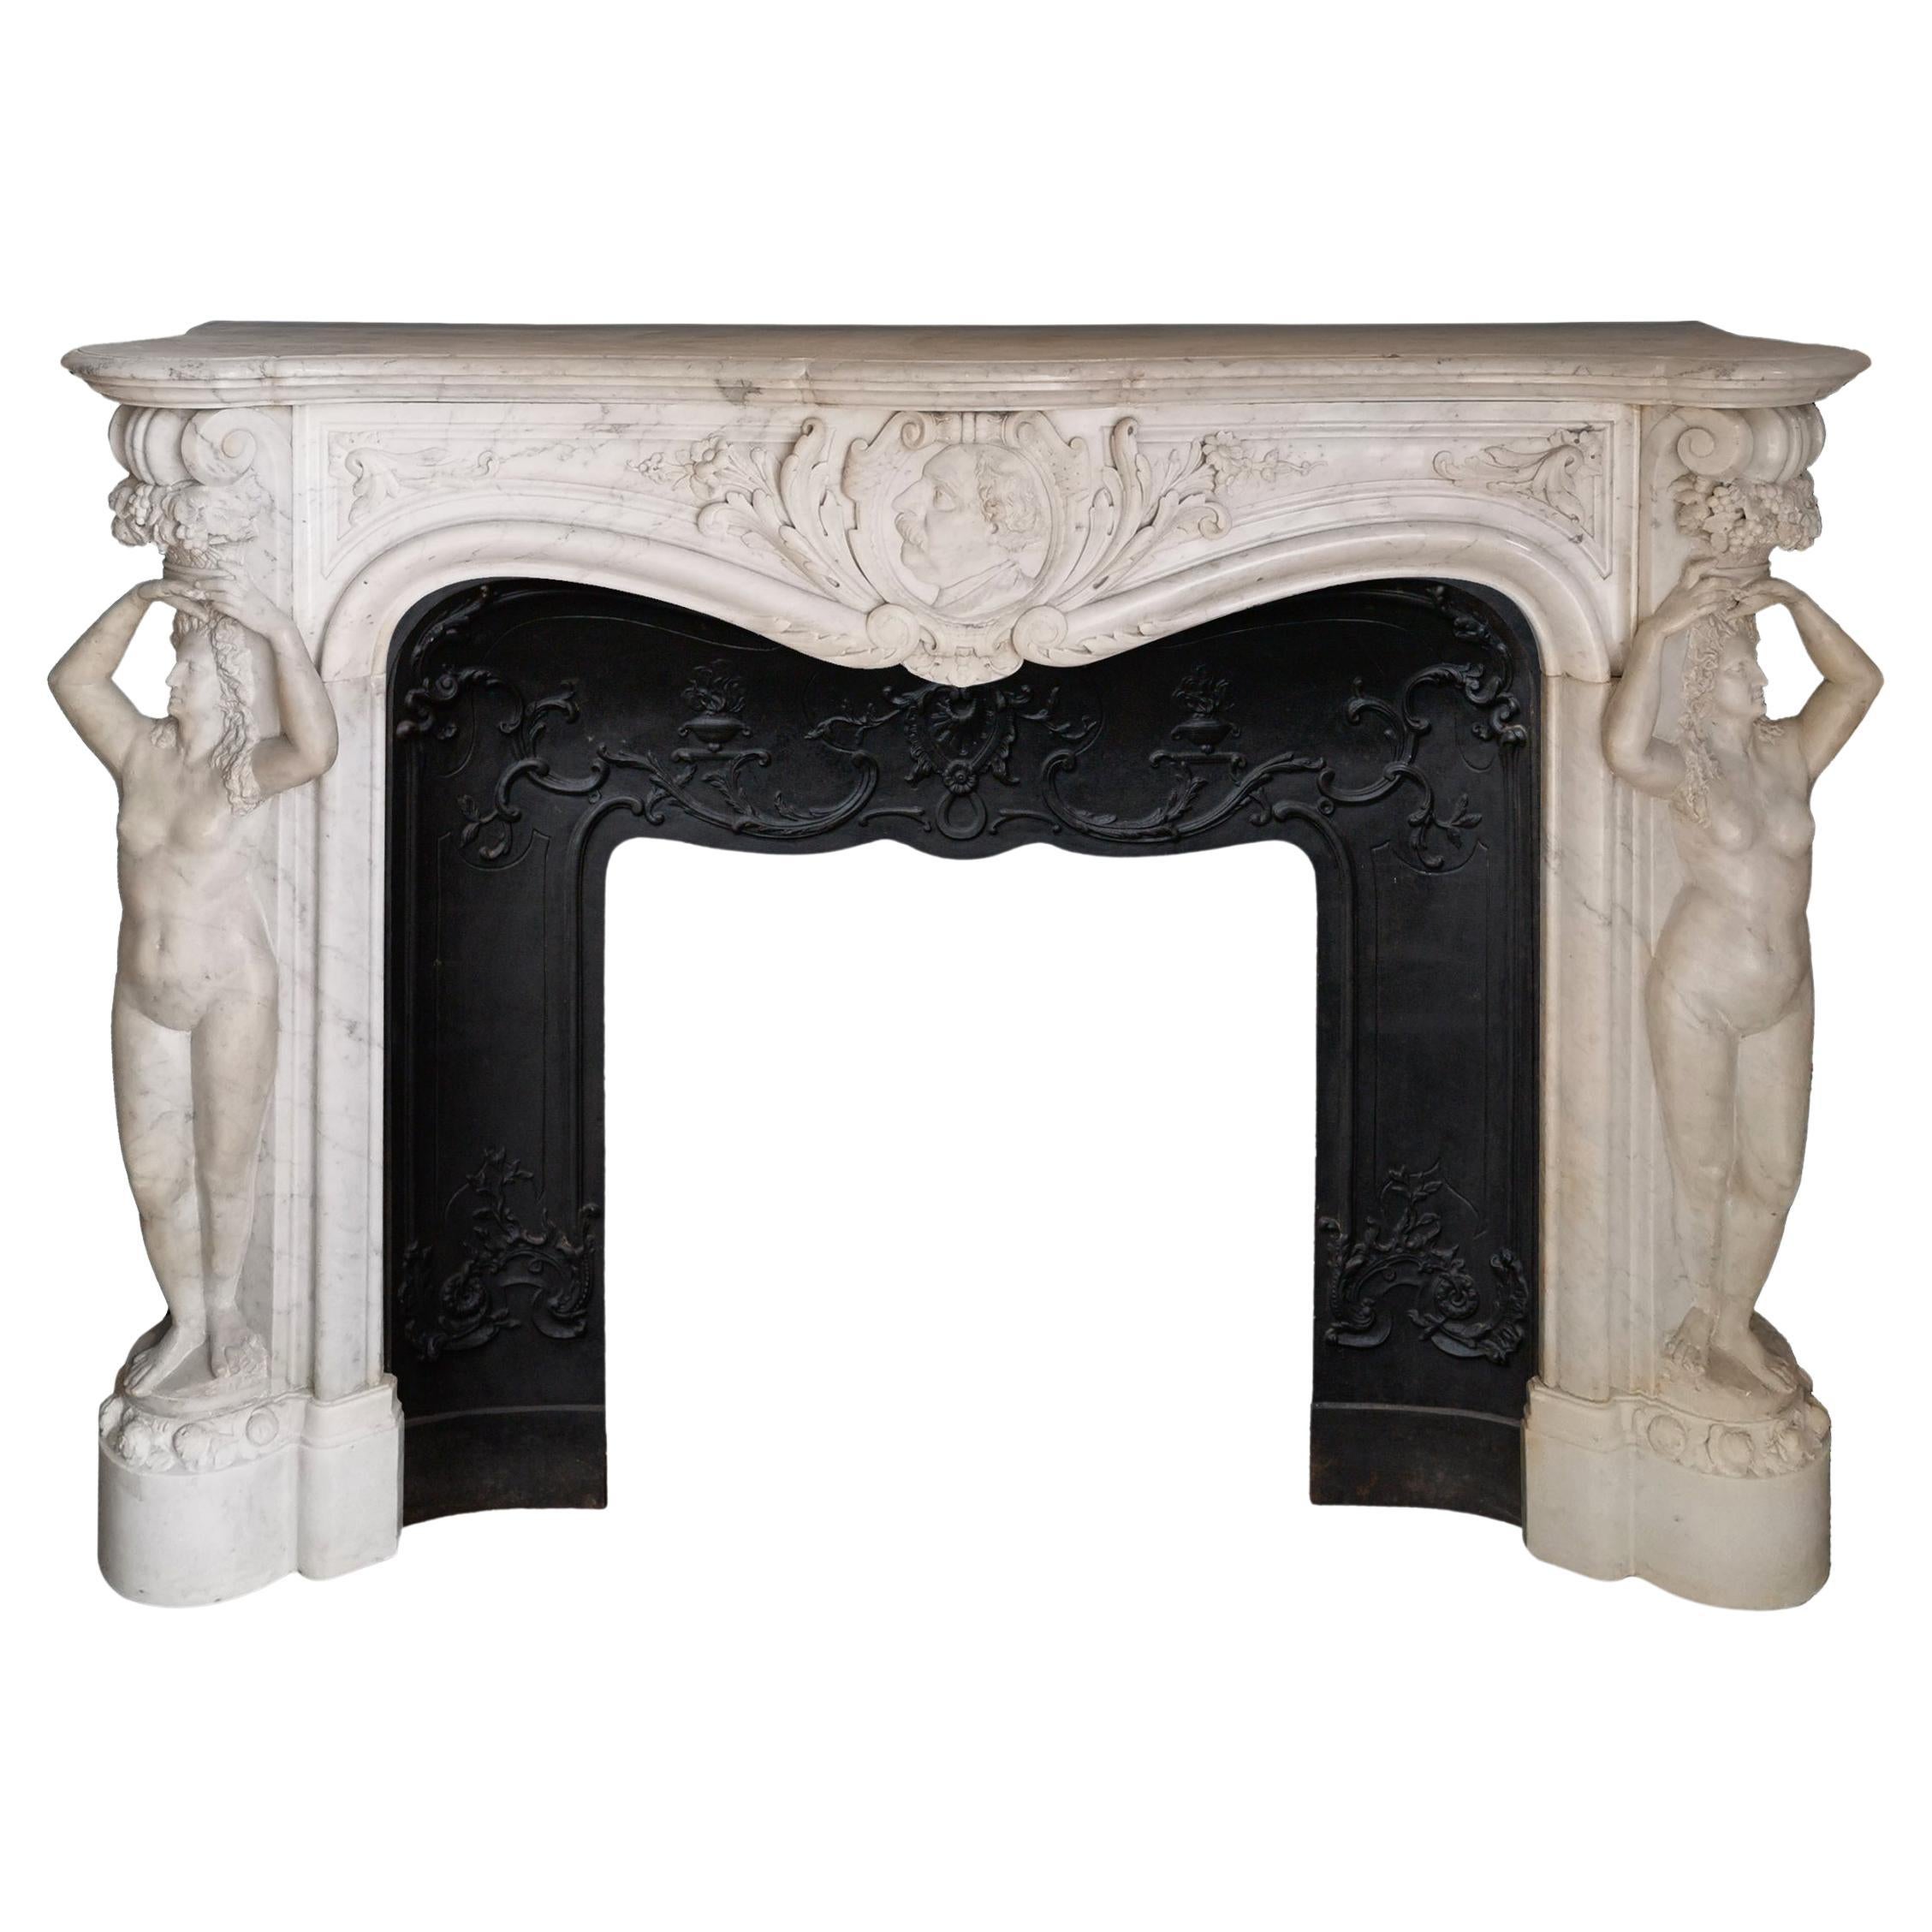 Napoleon III Marble Fireplace with Caryatids, Unique Creation, 1880